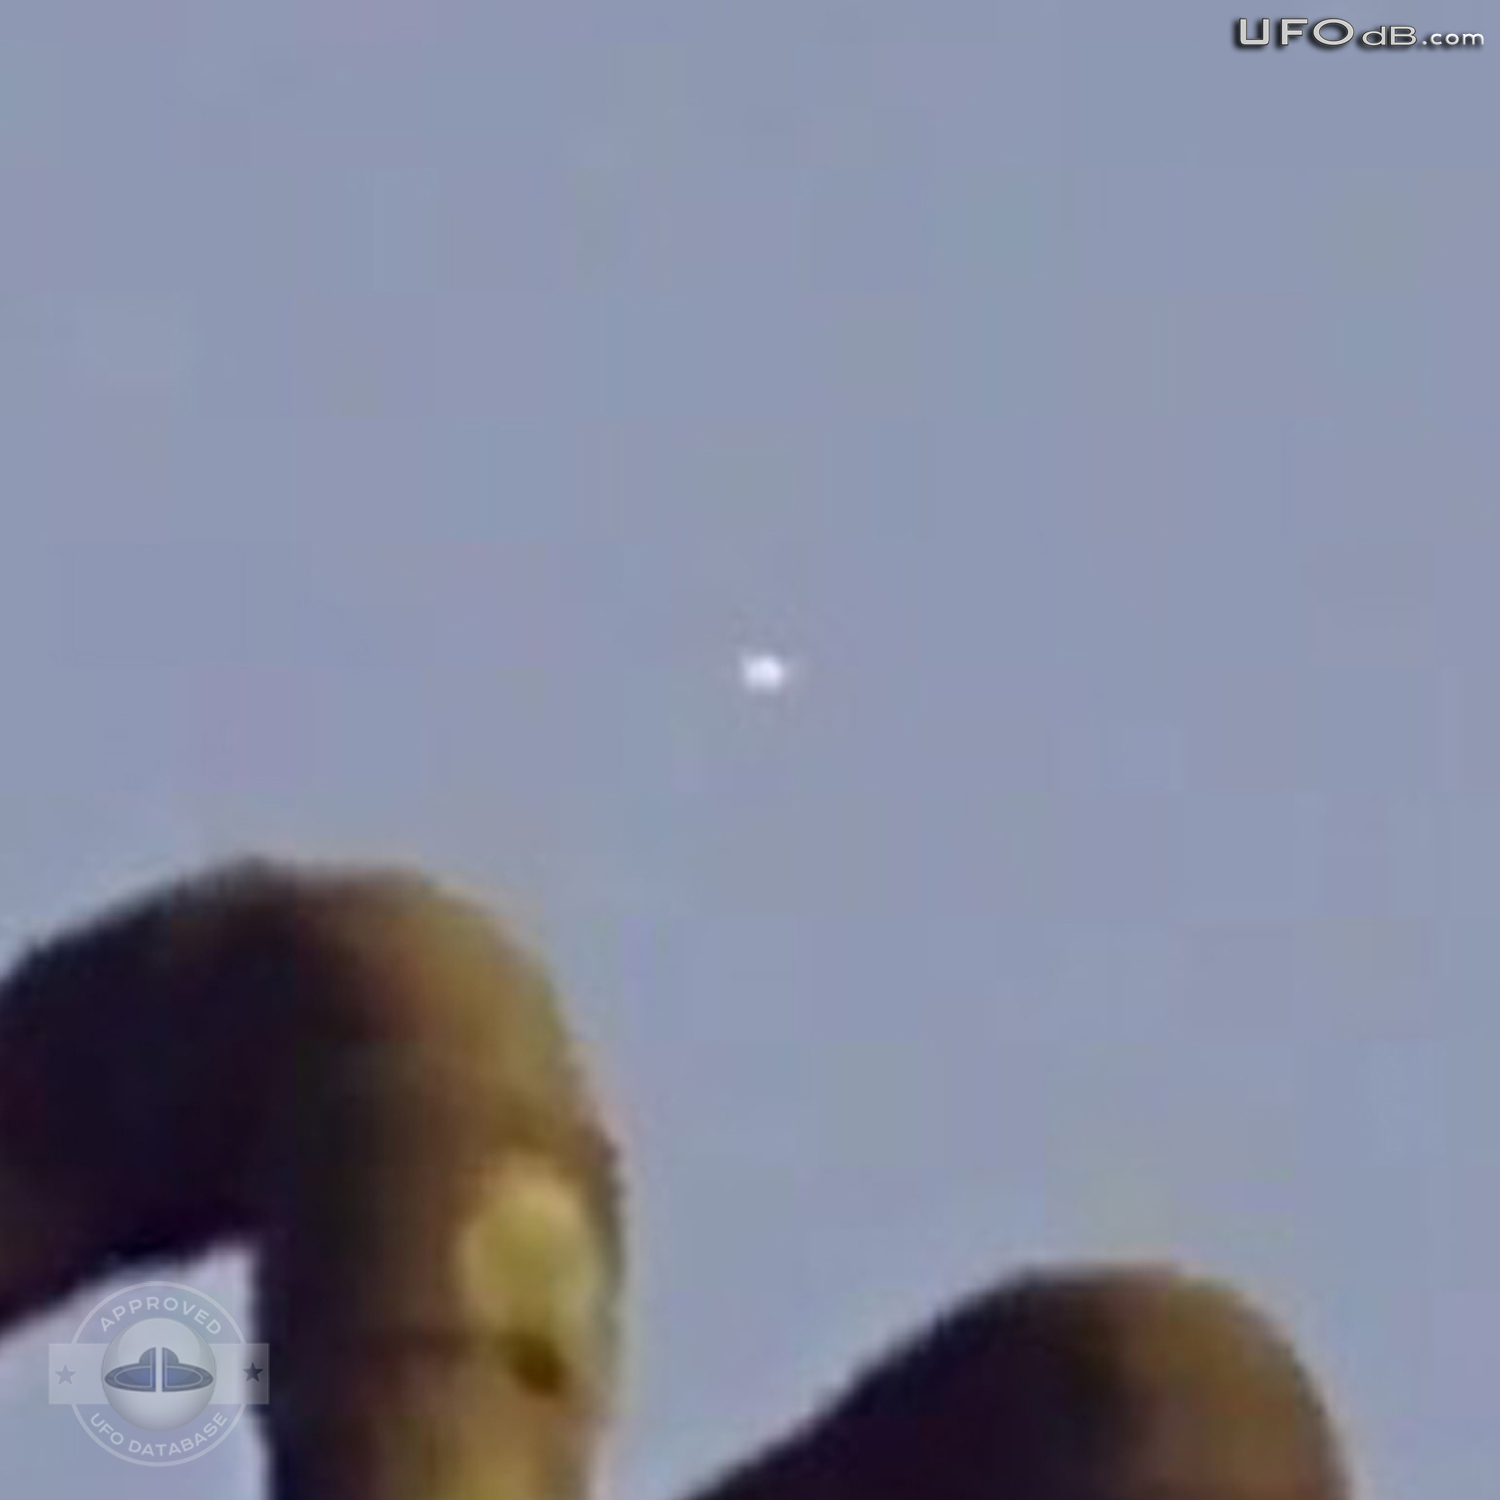 White craft UFO passing in the clouds of Mexico City | May 13 2011 UFO Picture #305-3